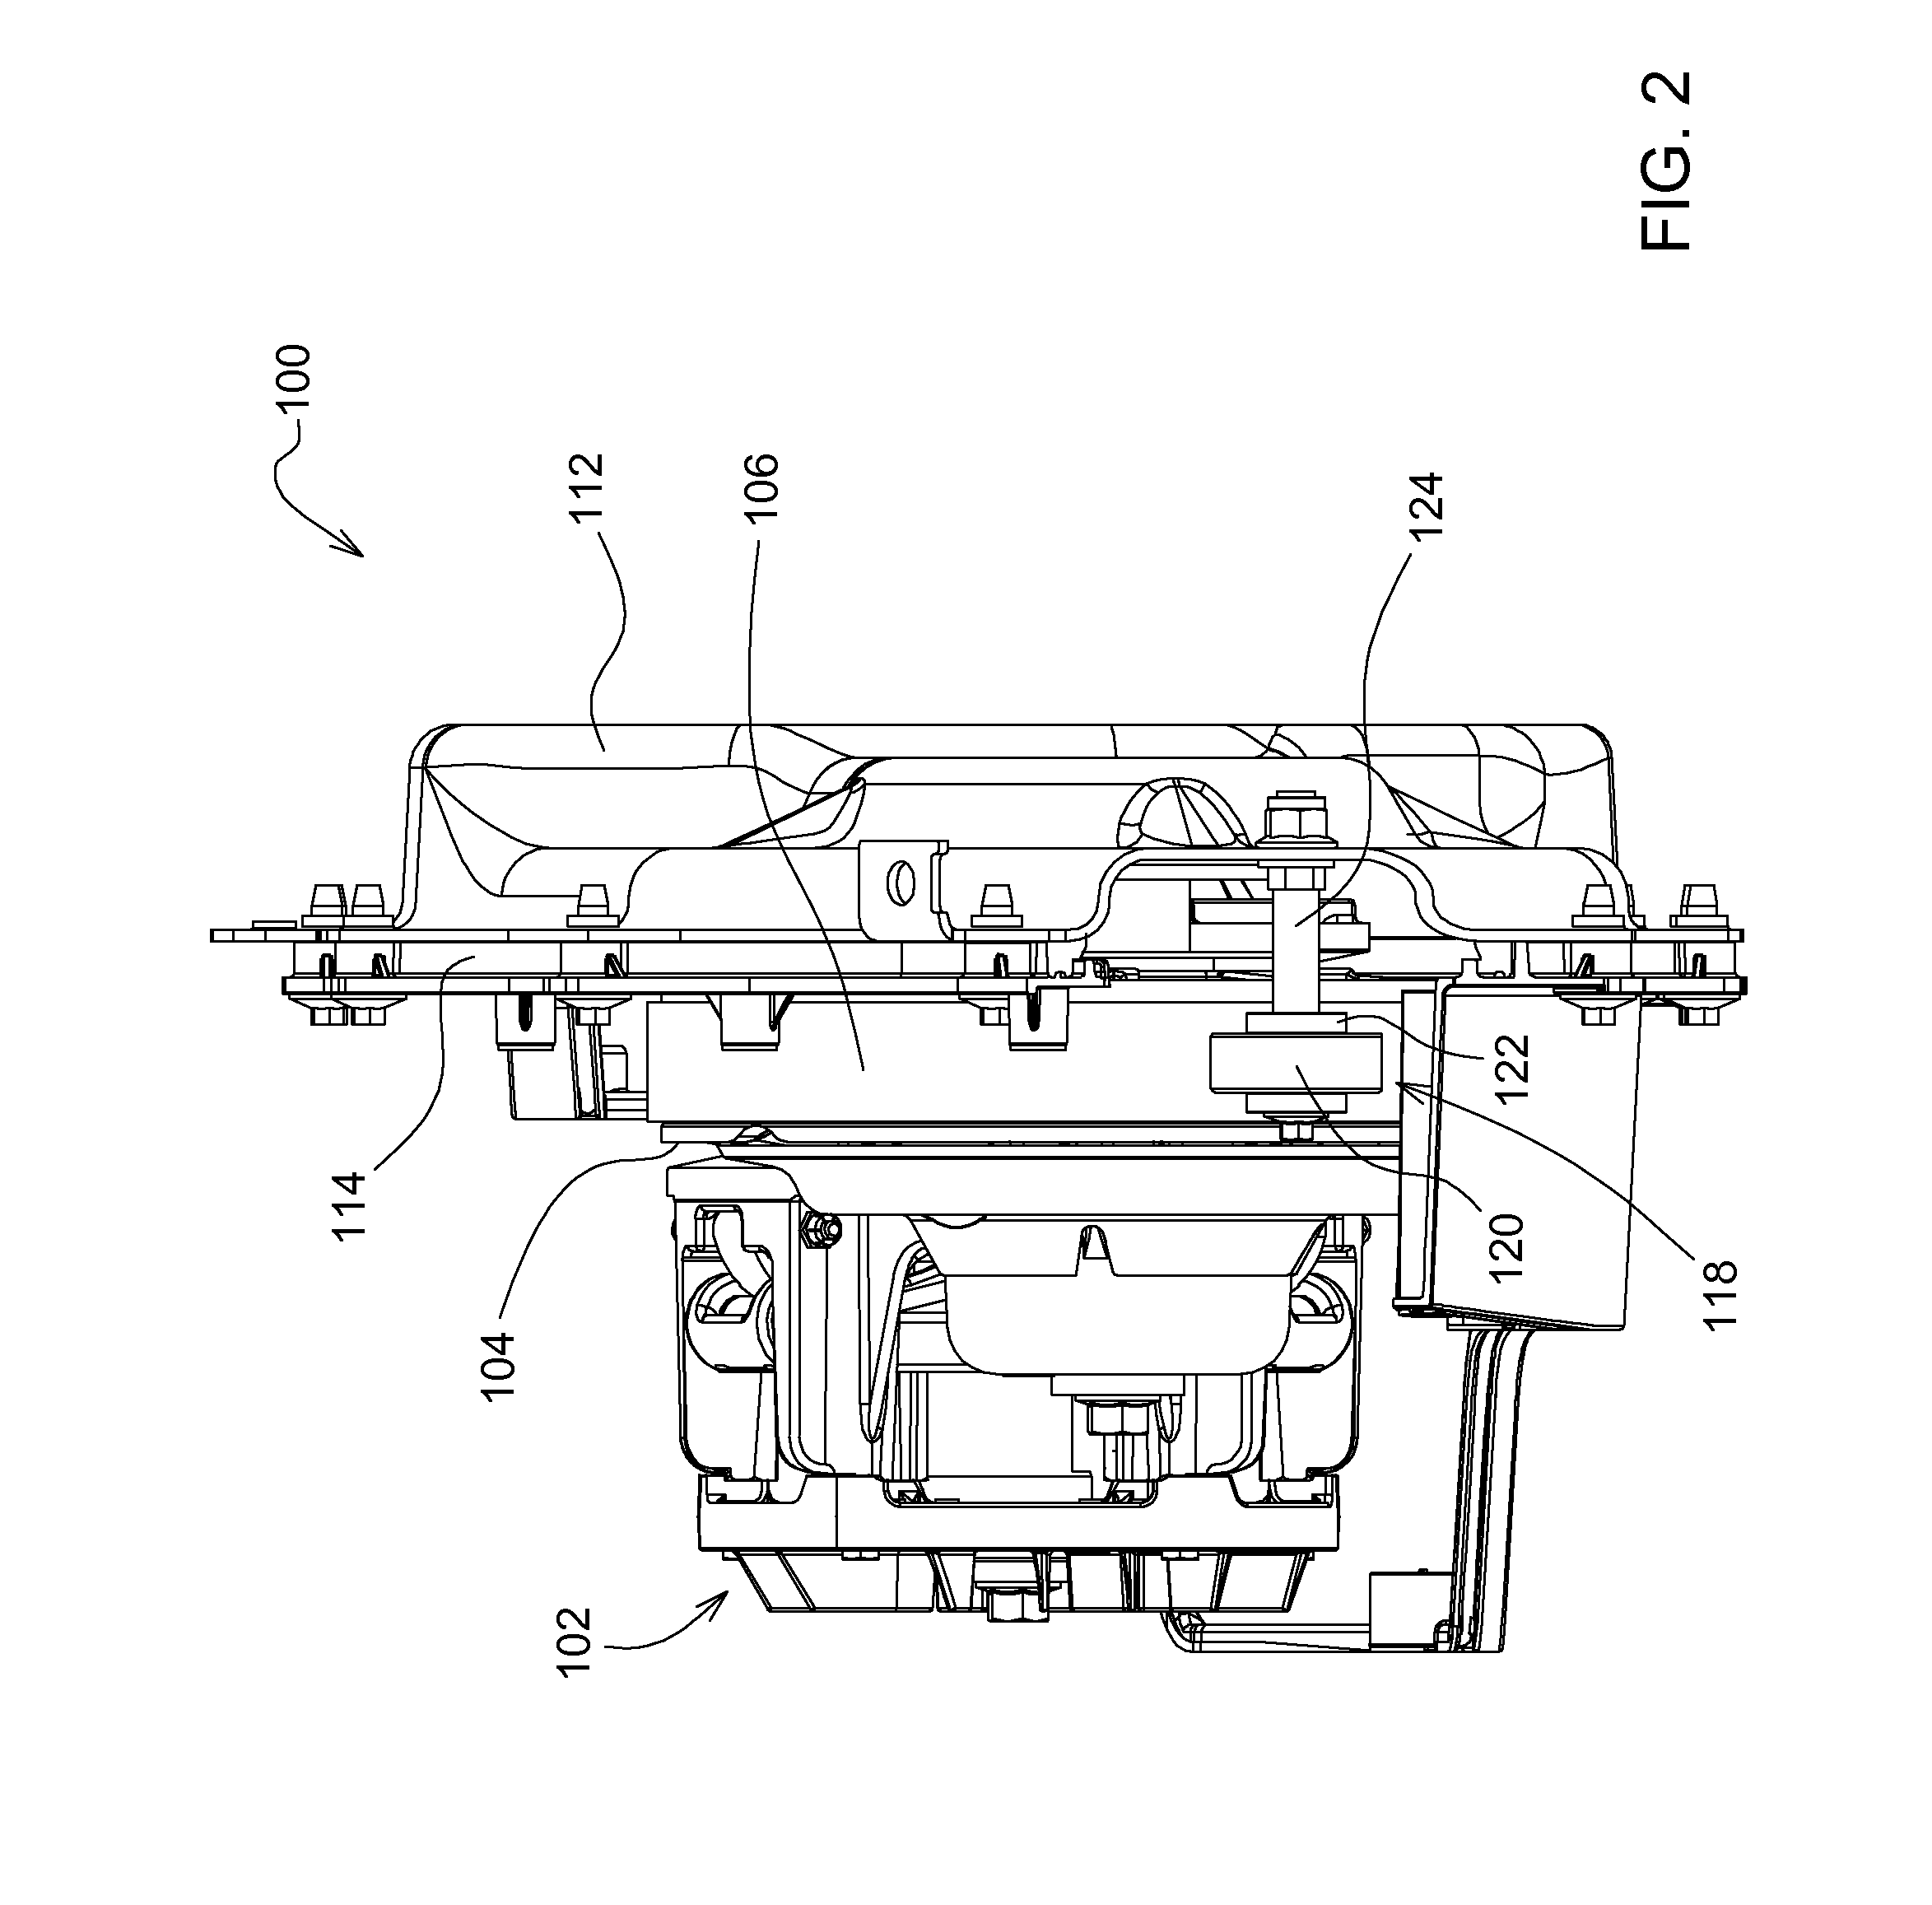 Continuously variable transmission cooling fan